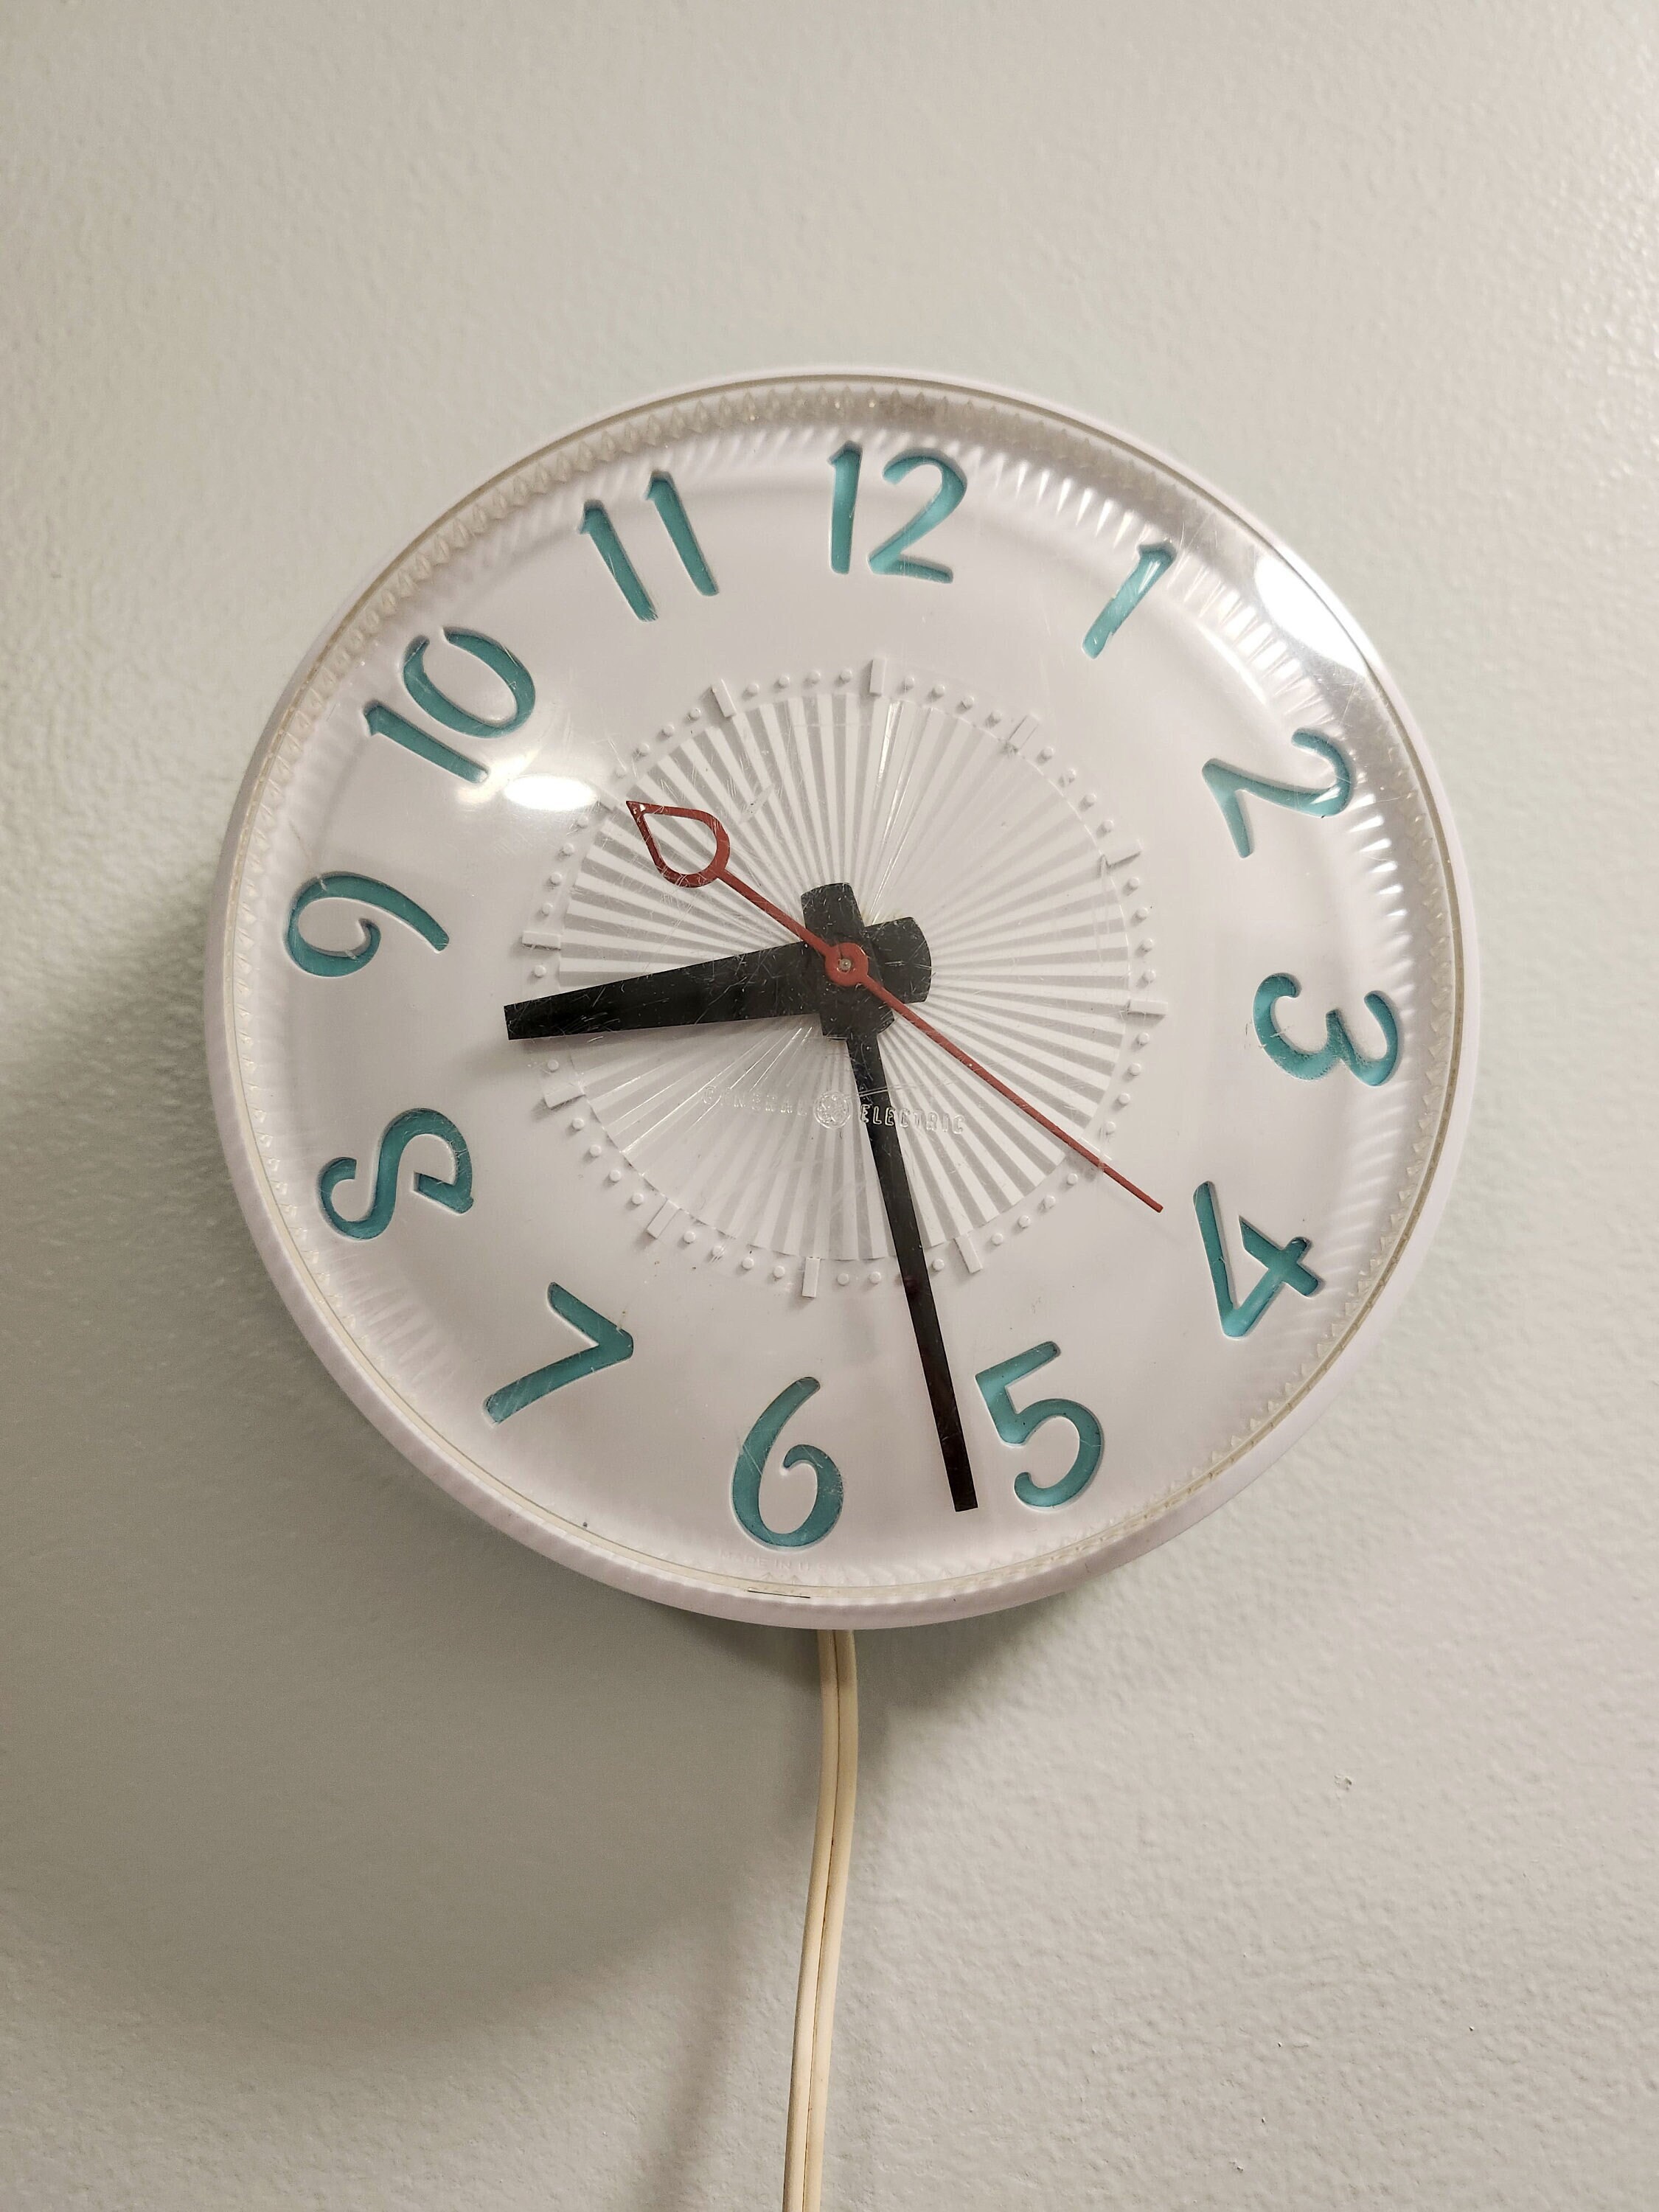 General Electric Wall Clock - Etsy